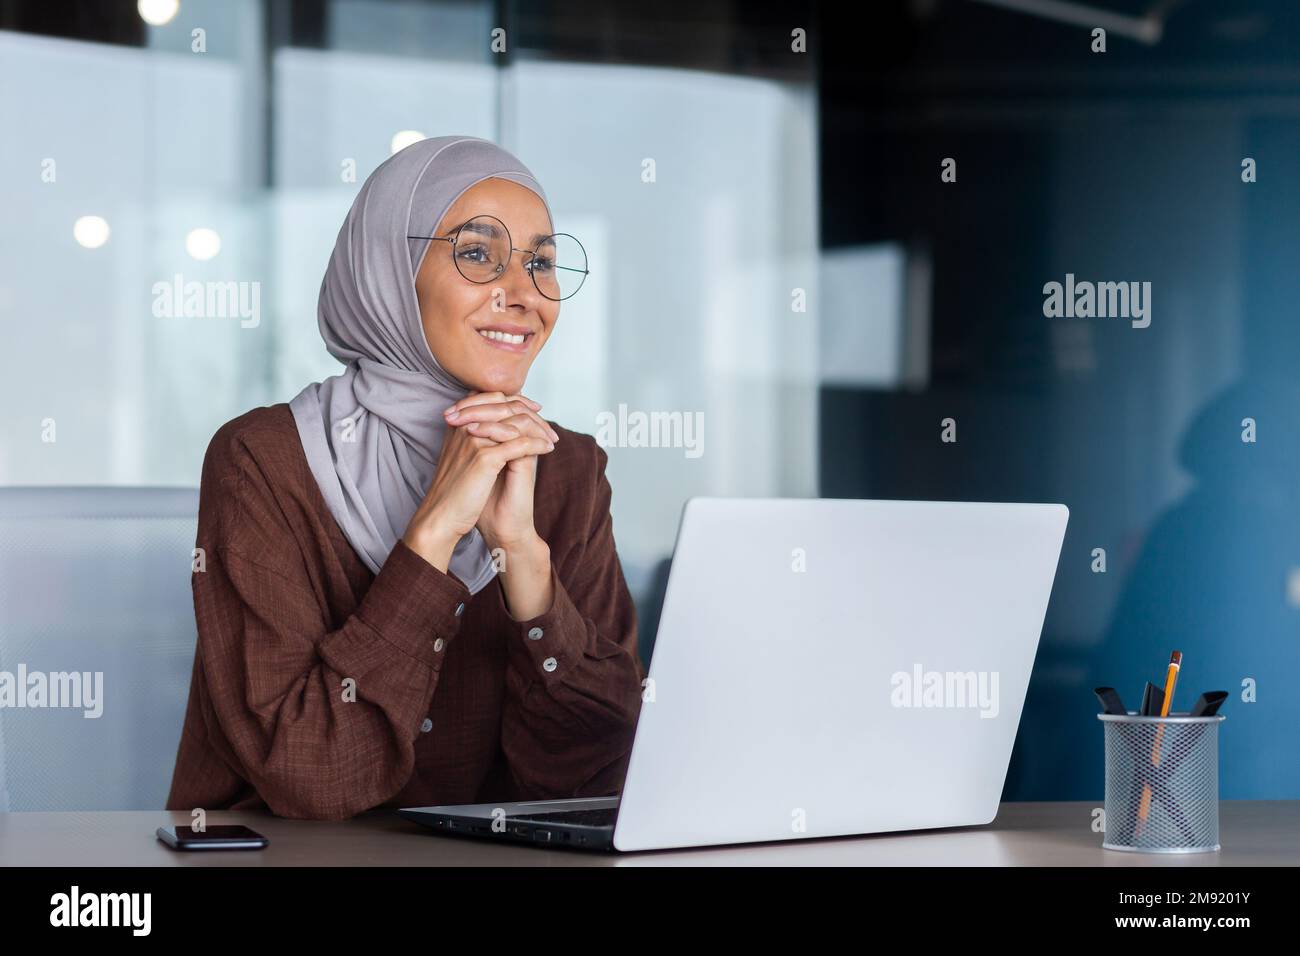 Smiling and dreamy businesswoman working inside office with laptop, woman in hijab and glasses office worker happy and satisfied with work sitting at desk. Stock Photo